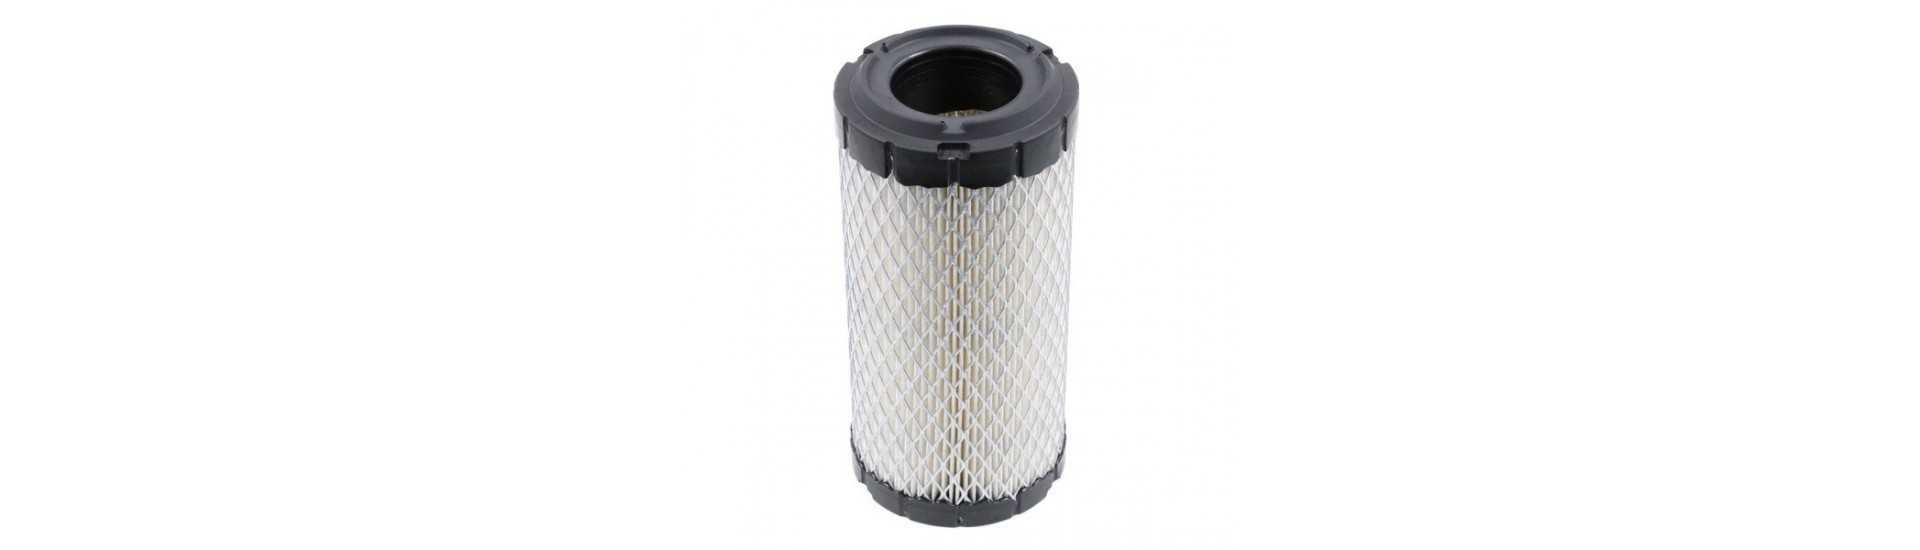 Air filter at the best price for car without a permit